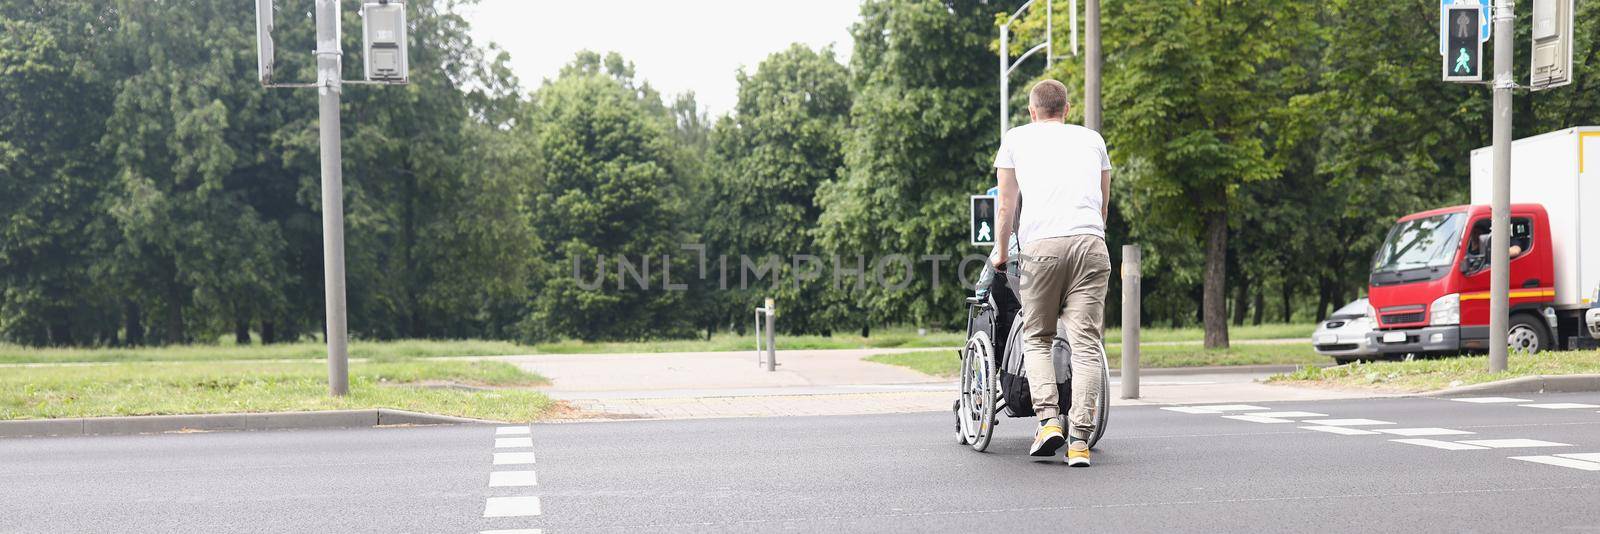 Man drive woman on wheelchair across street at pedestrian crossing by kuprevich